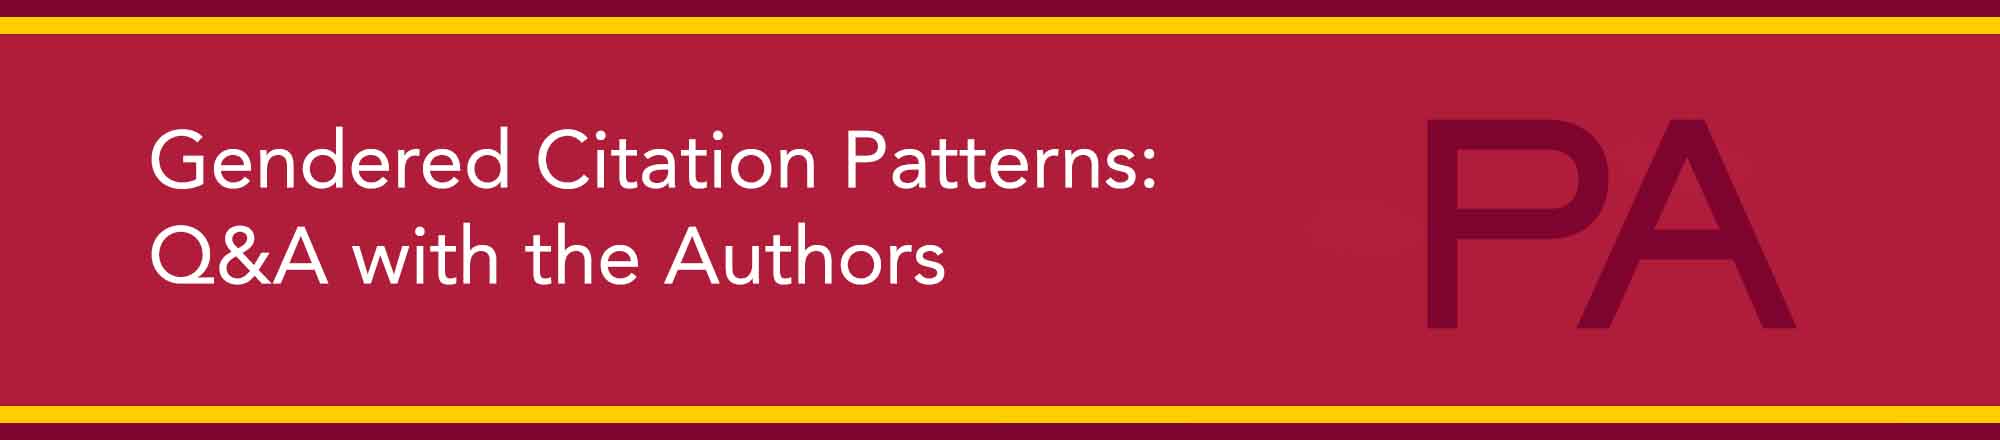 Gendered Citation Patterns: Q&A with the Authors